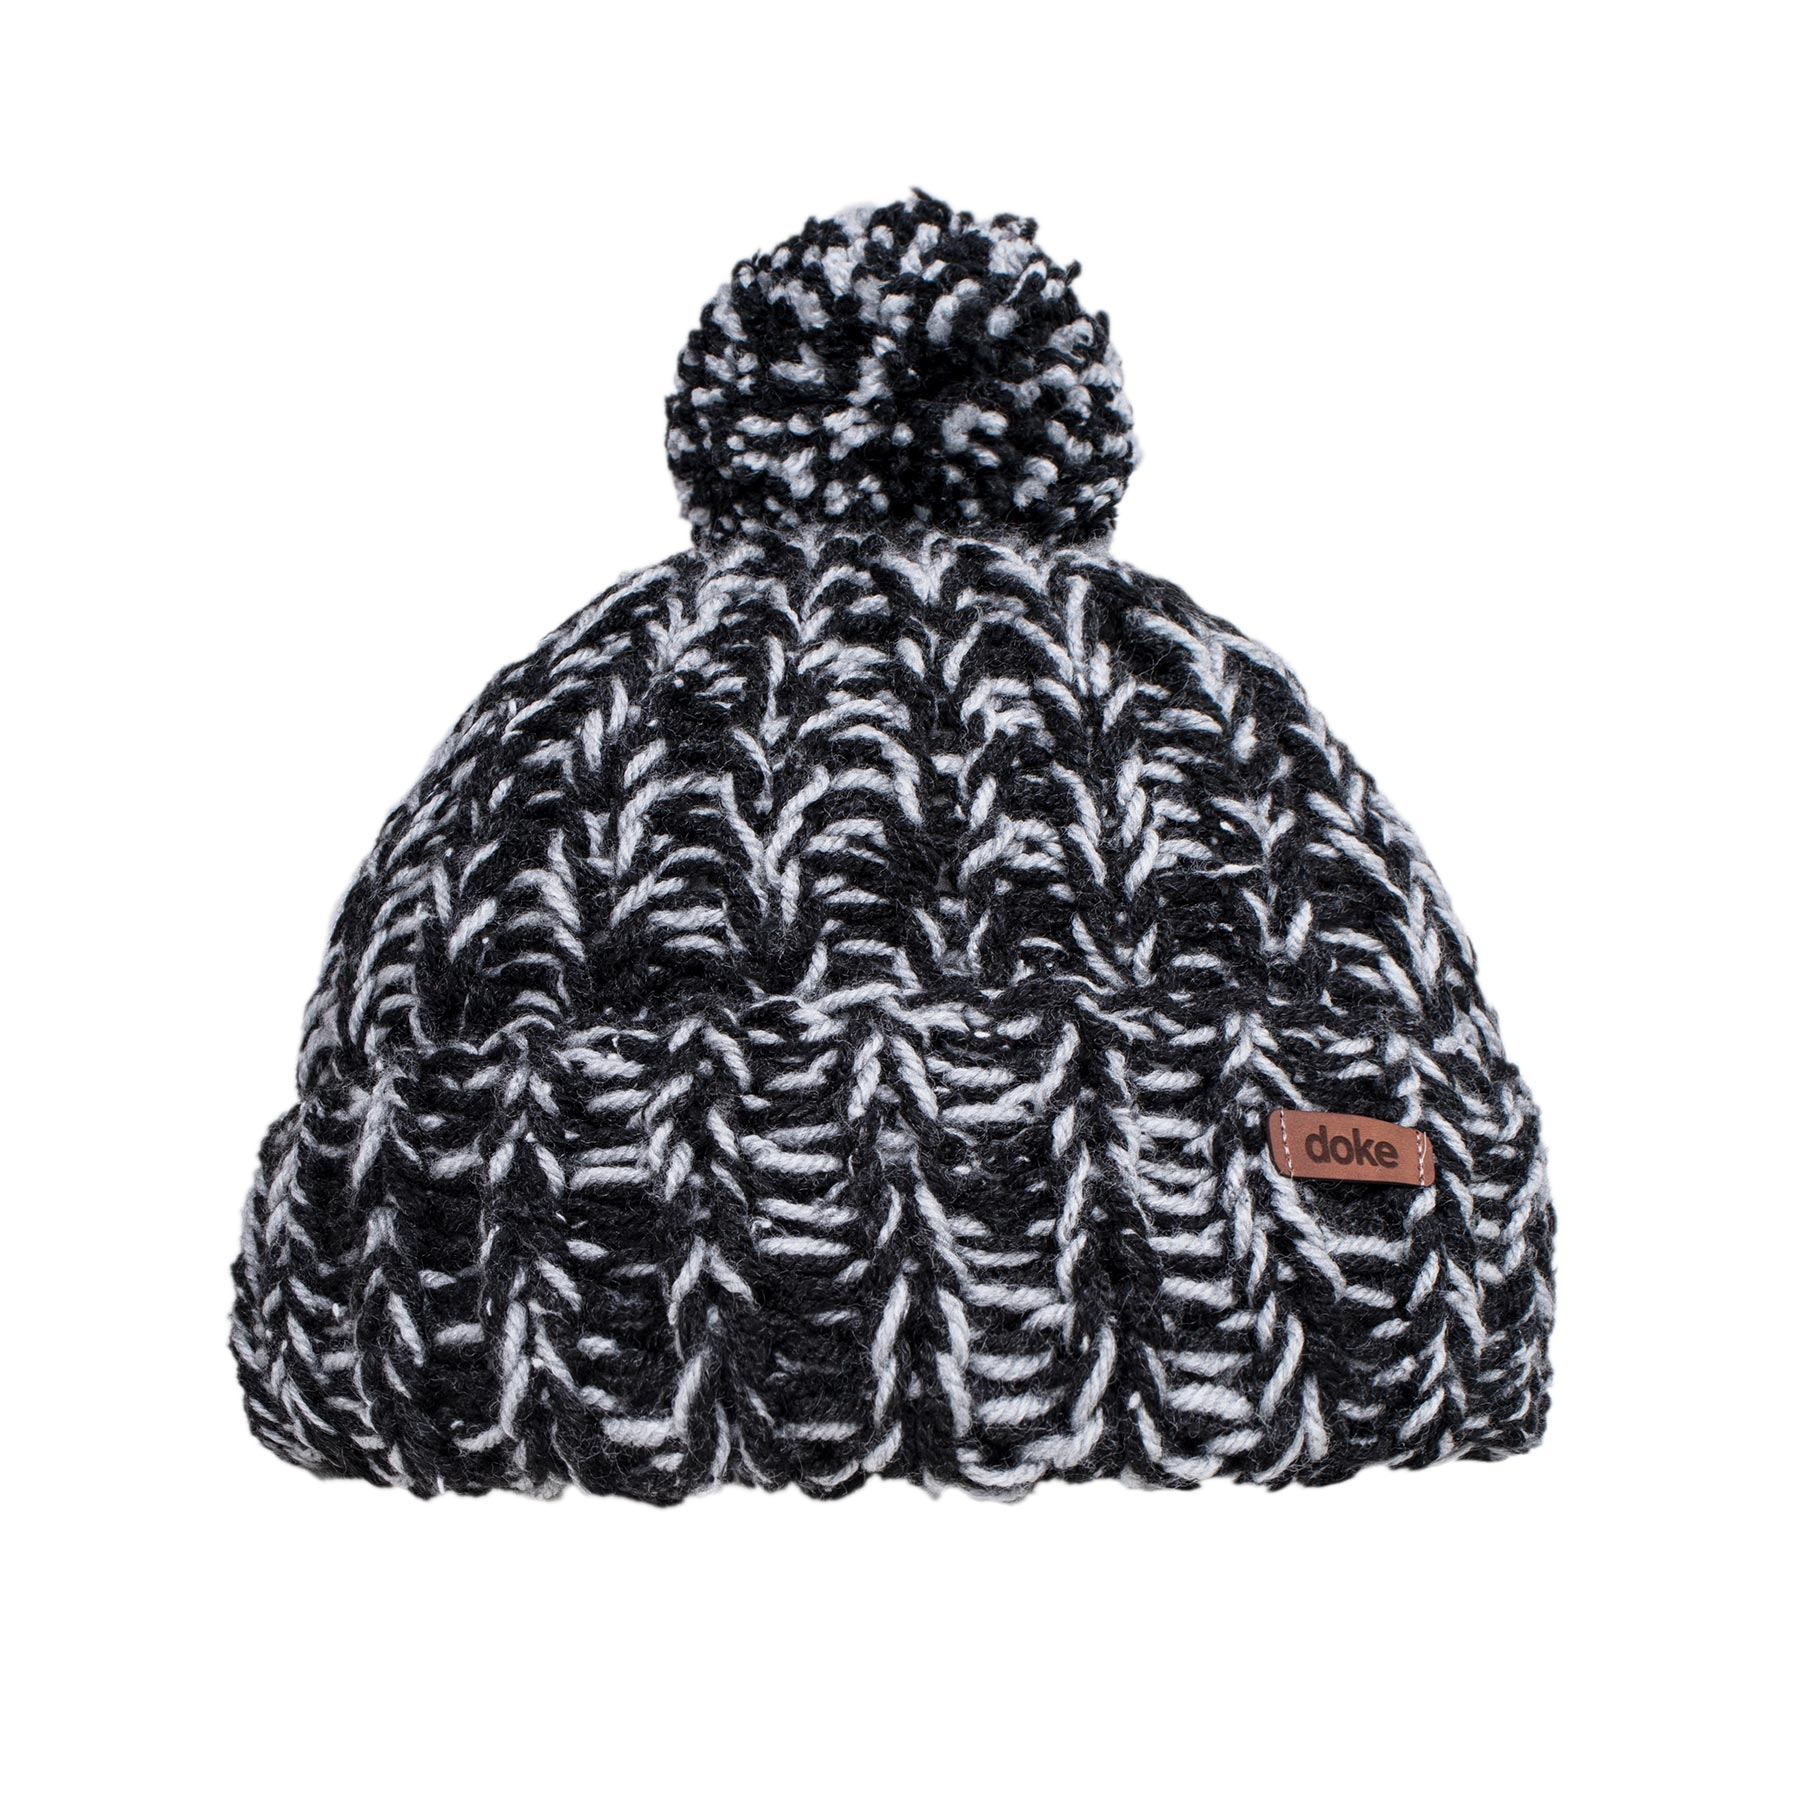 Knitted hat with pompom DOKE